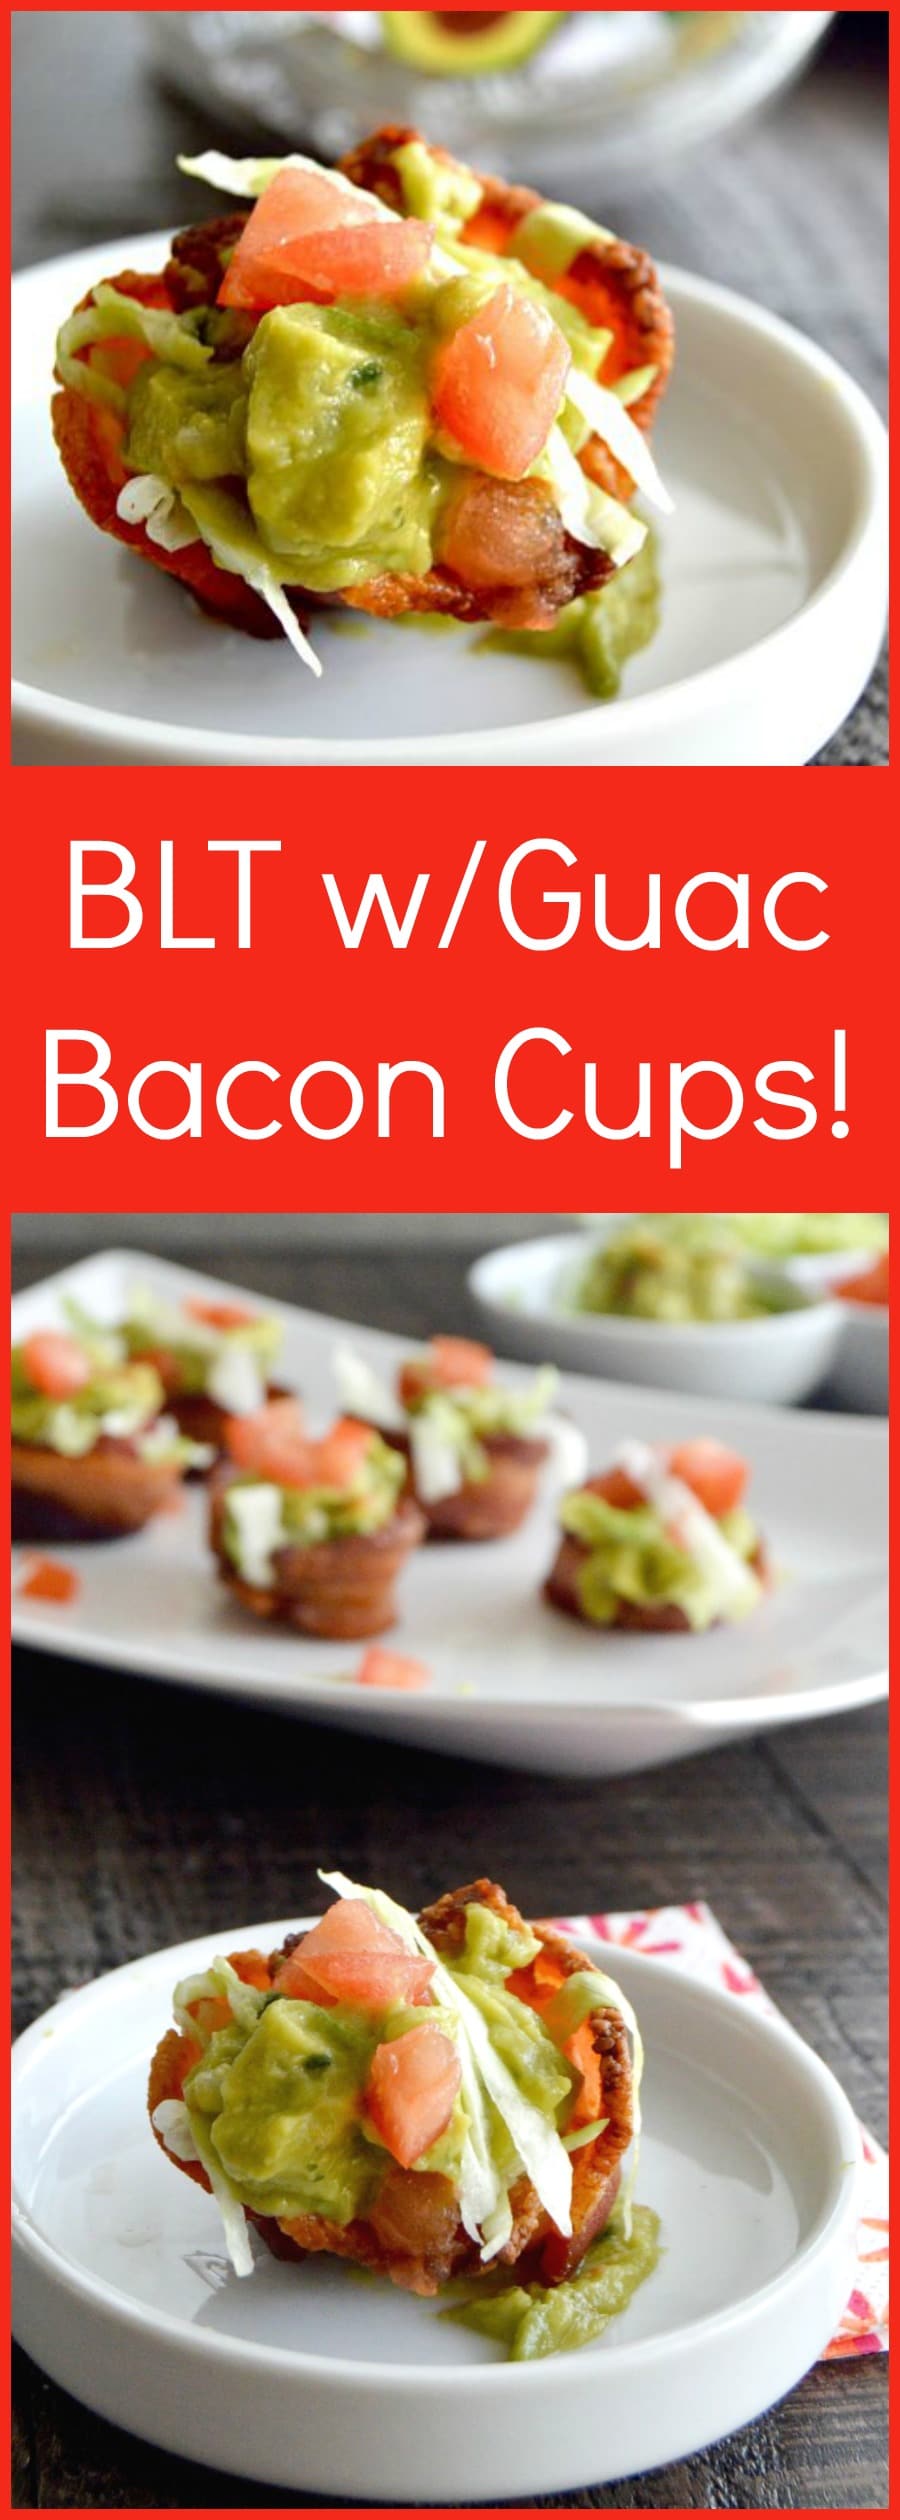 Guacamole BLT Bacon Cups are a low carb appetizer or snack that can be made in about 15 minutes. Crisp lettuce, juicy tomatoes a dollop of Guacamole all in a bite sized crispy bacon cup!